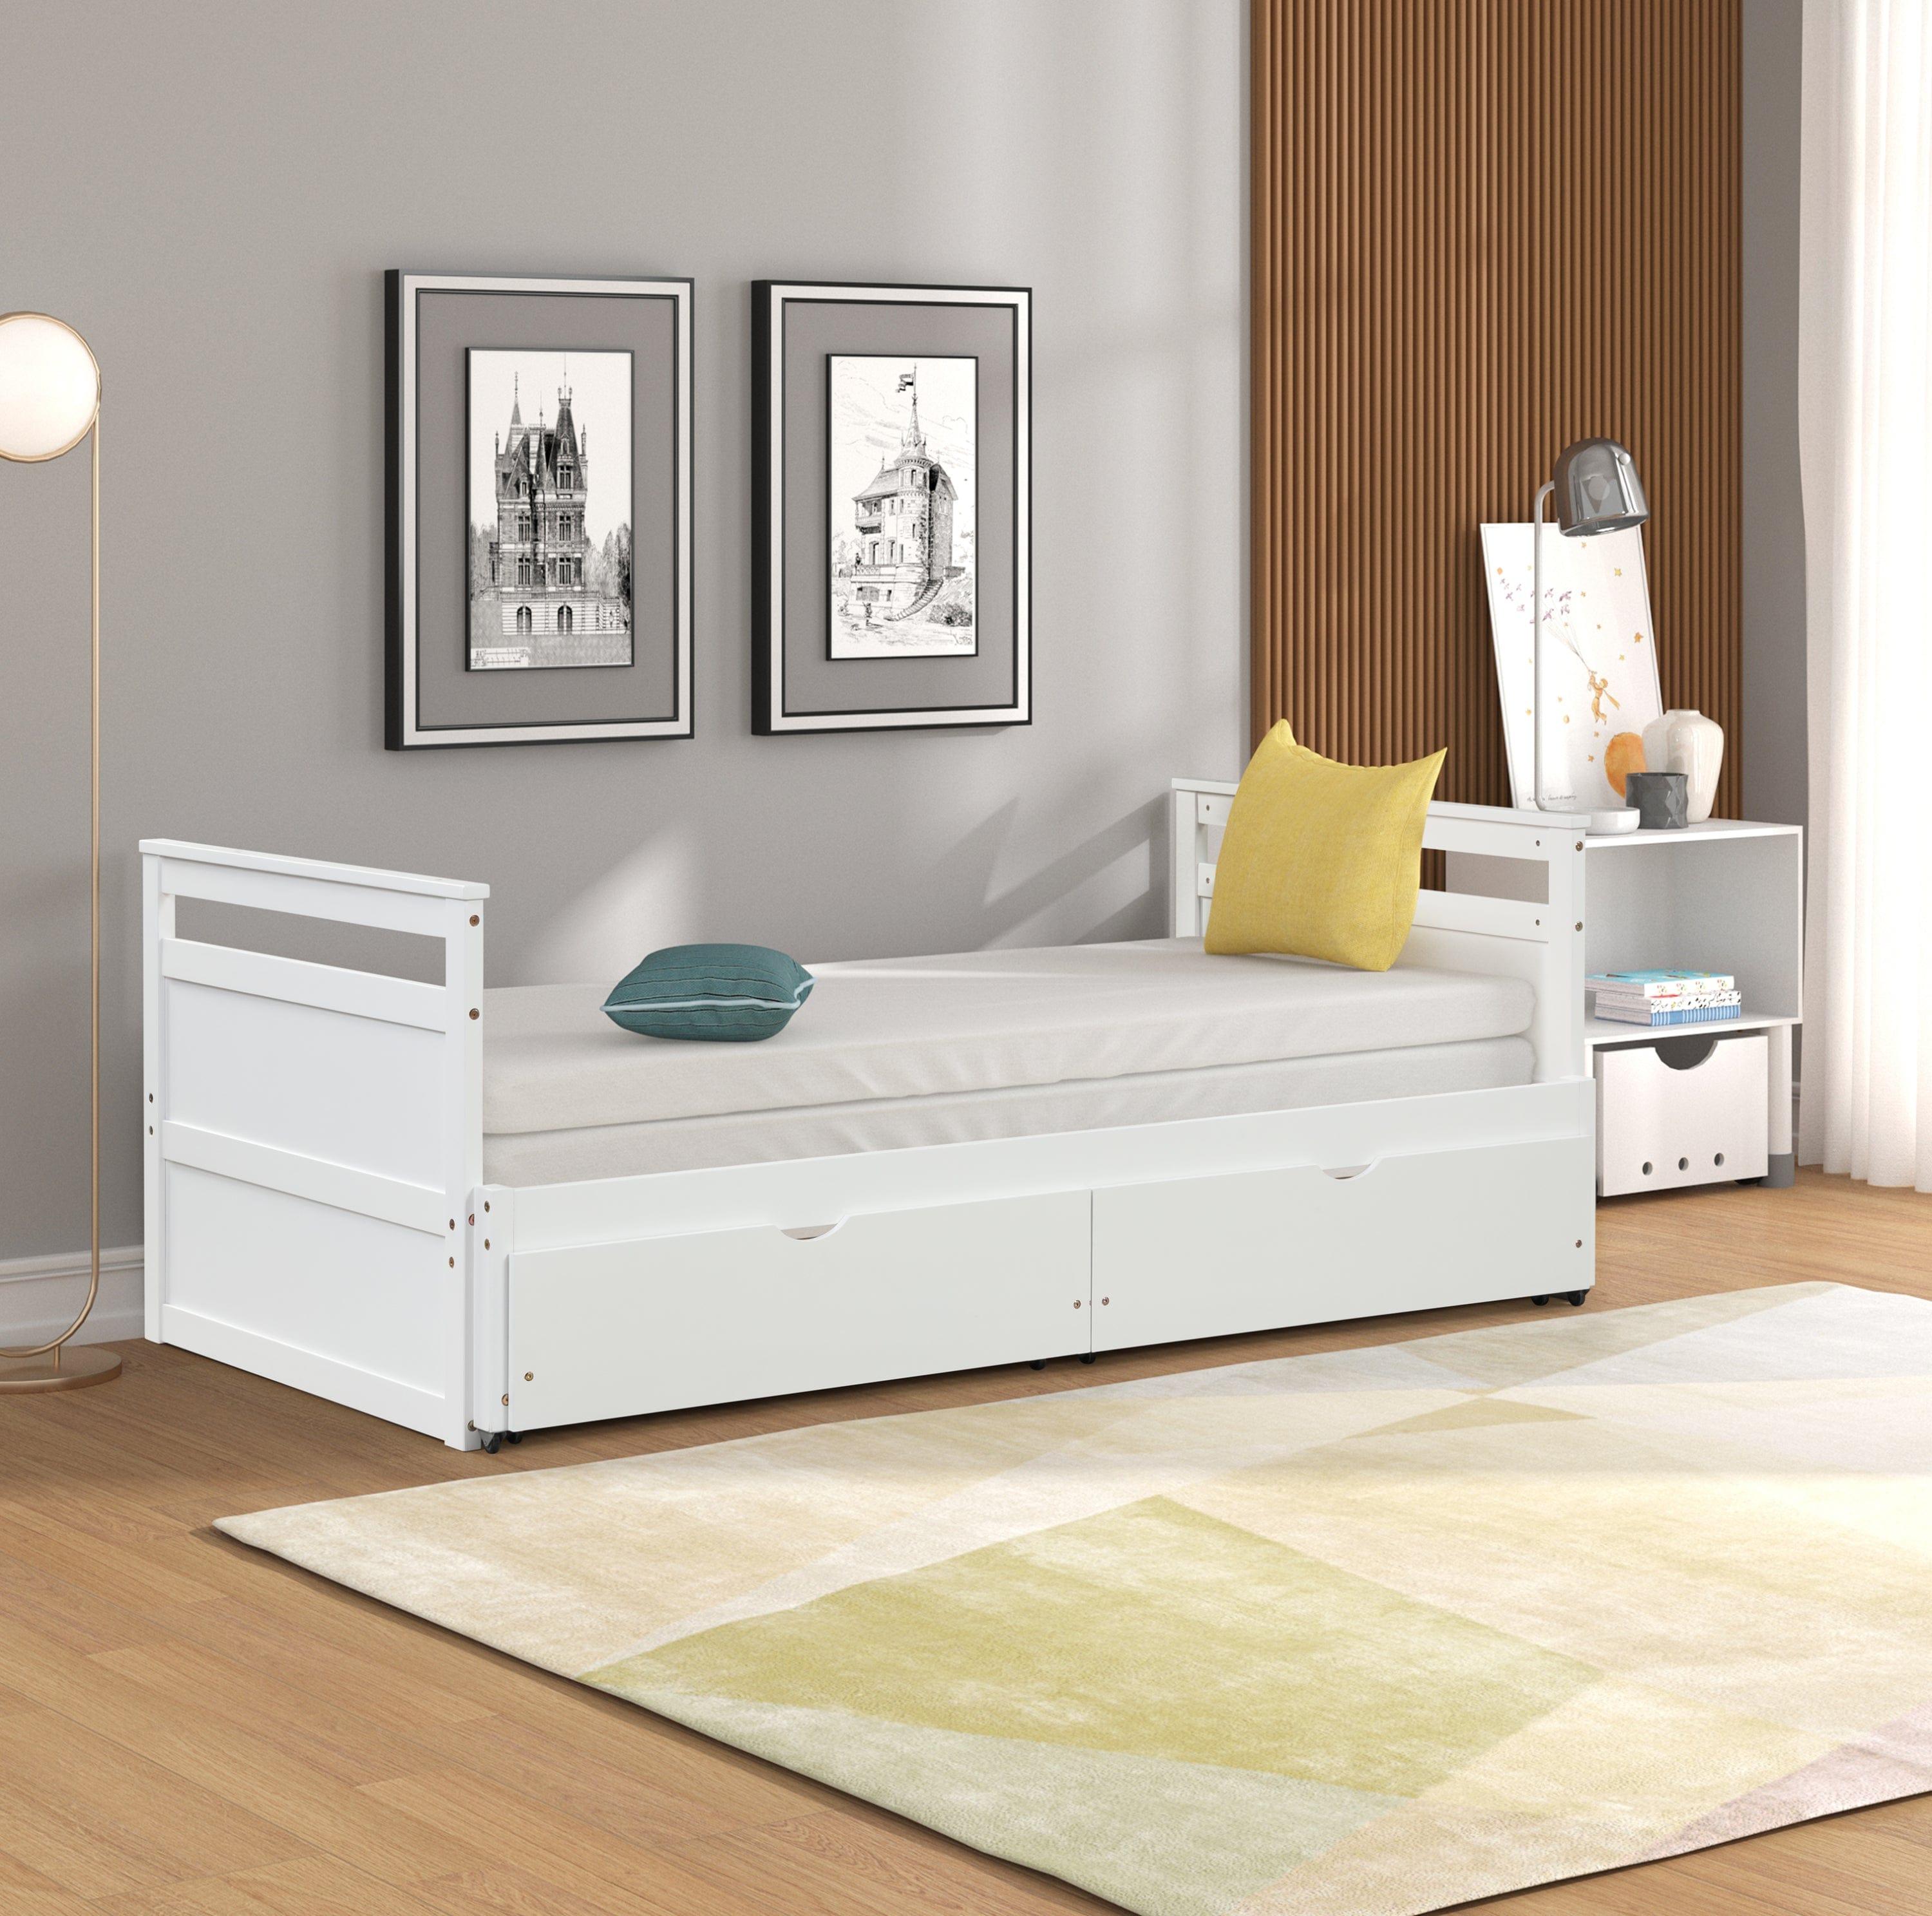 Shop Sicily Bed - Twin Mademoiselle Home Decor